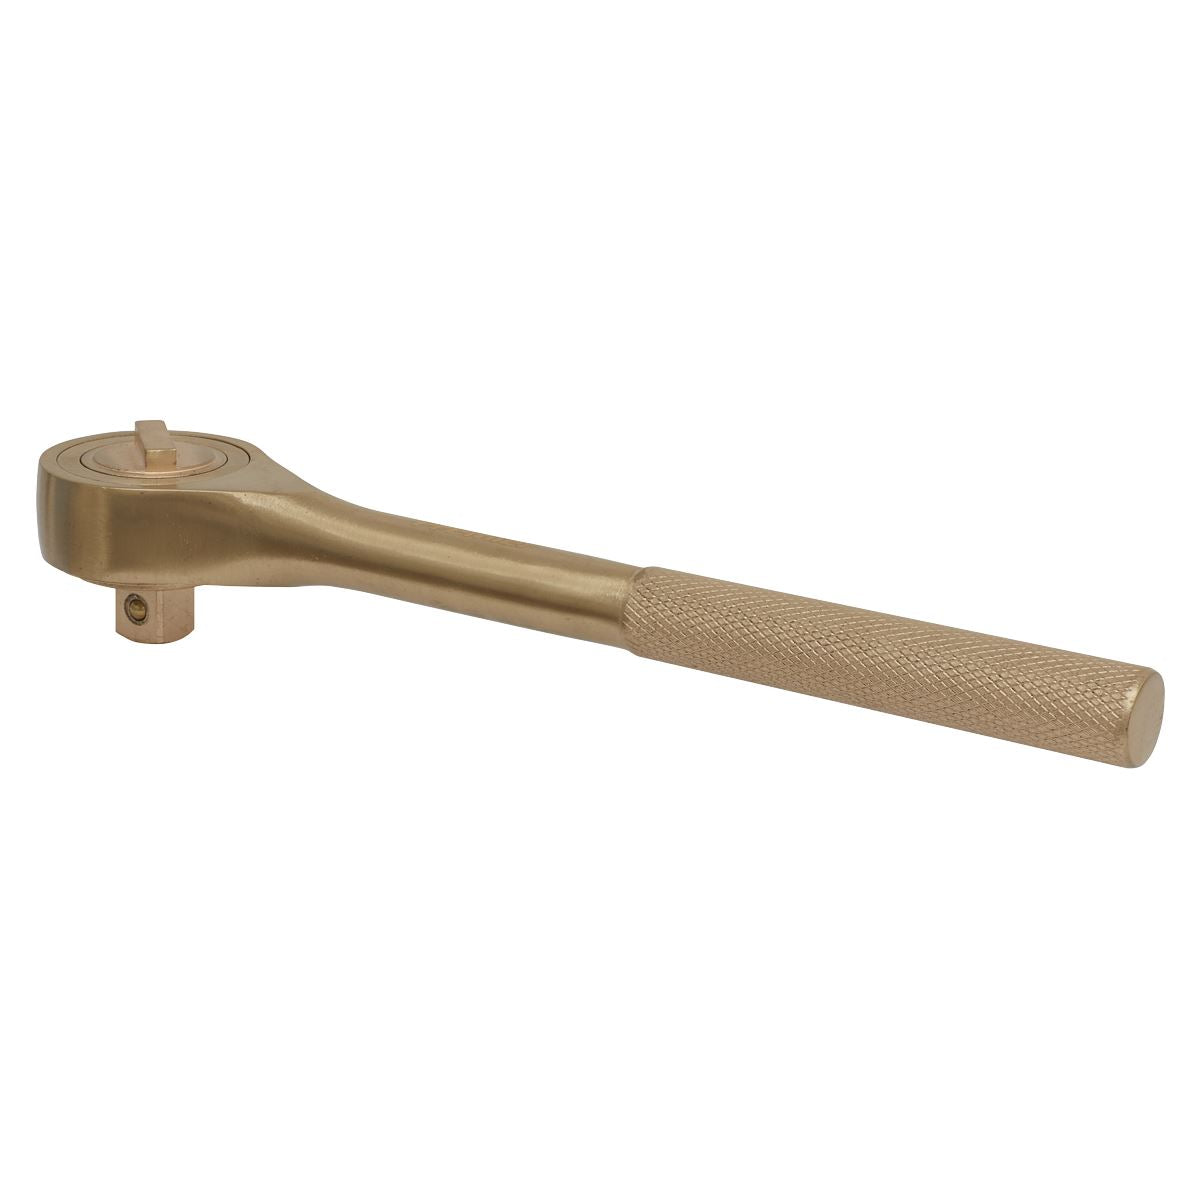 Sealey Premier Ratchet Wrench 1/2"Sq Drive - Non-Sparking